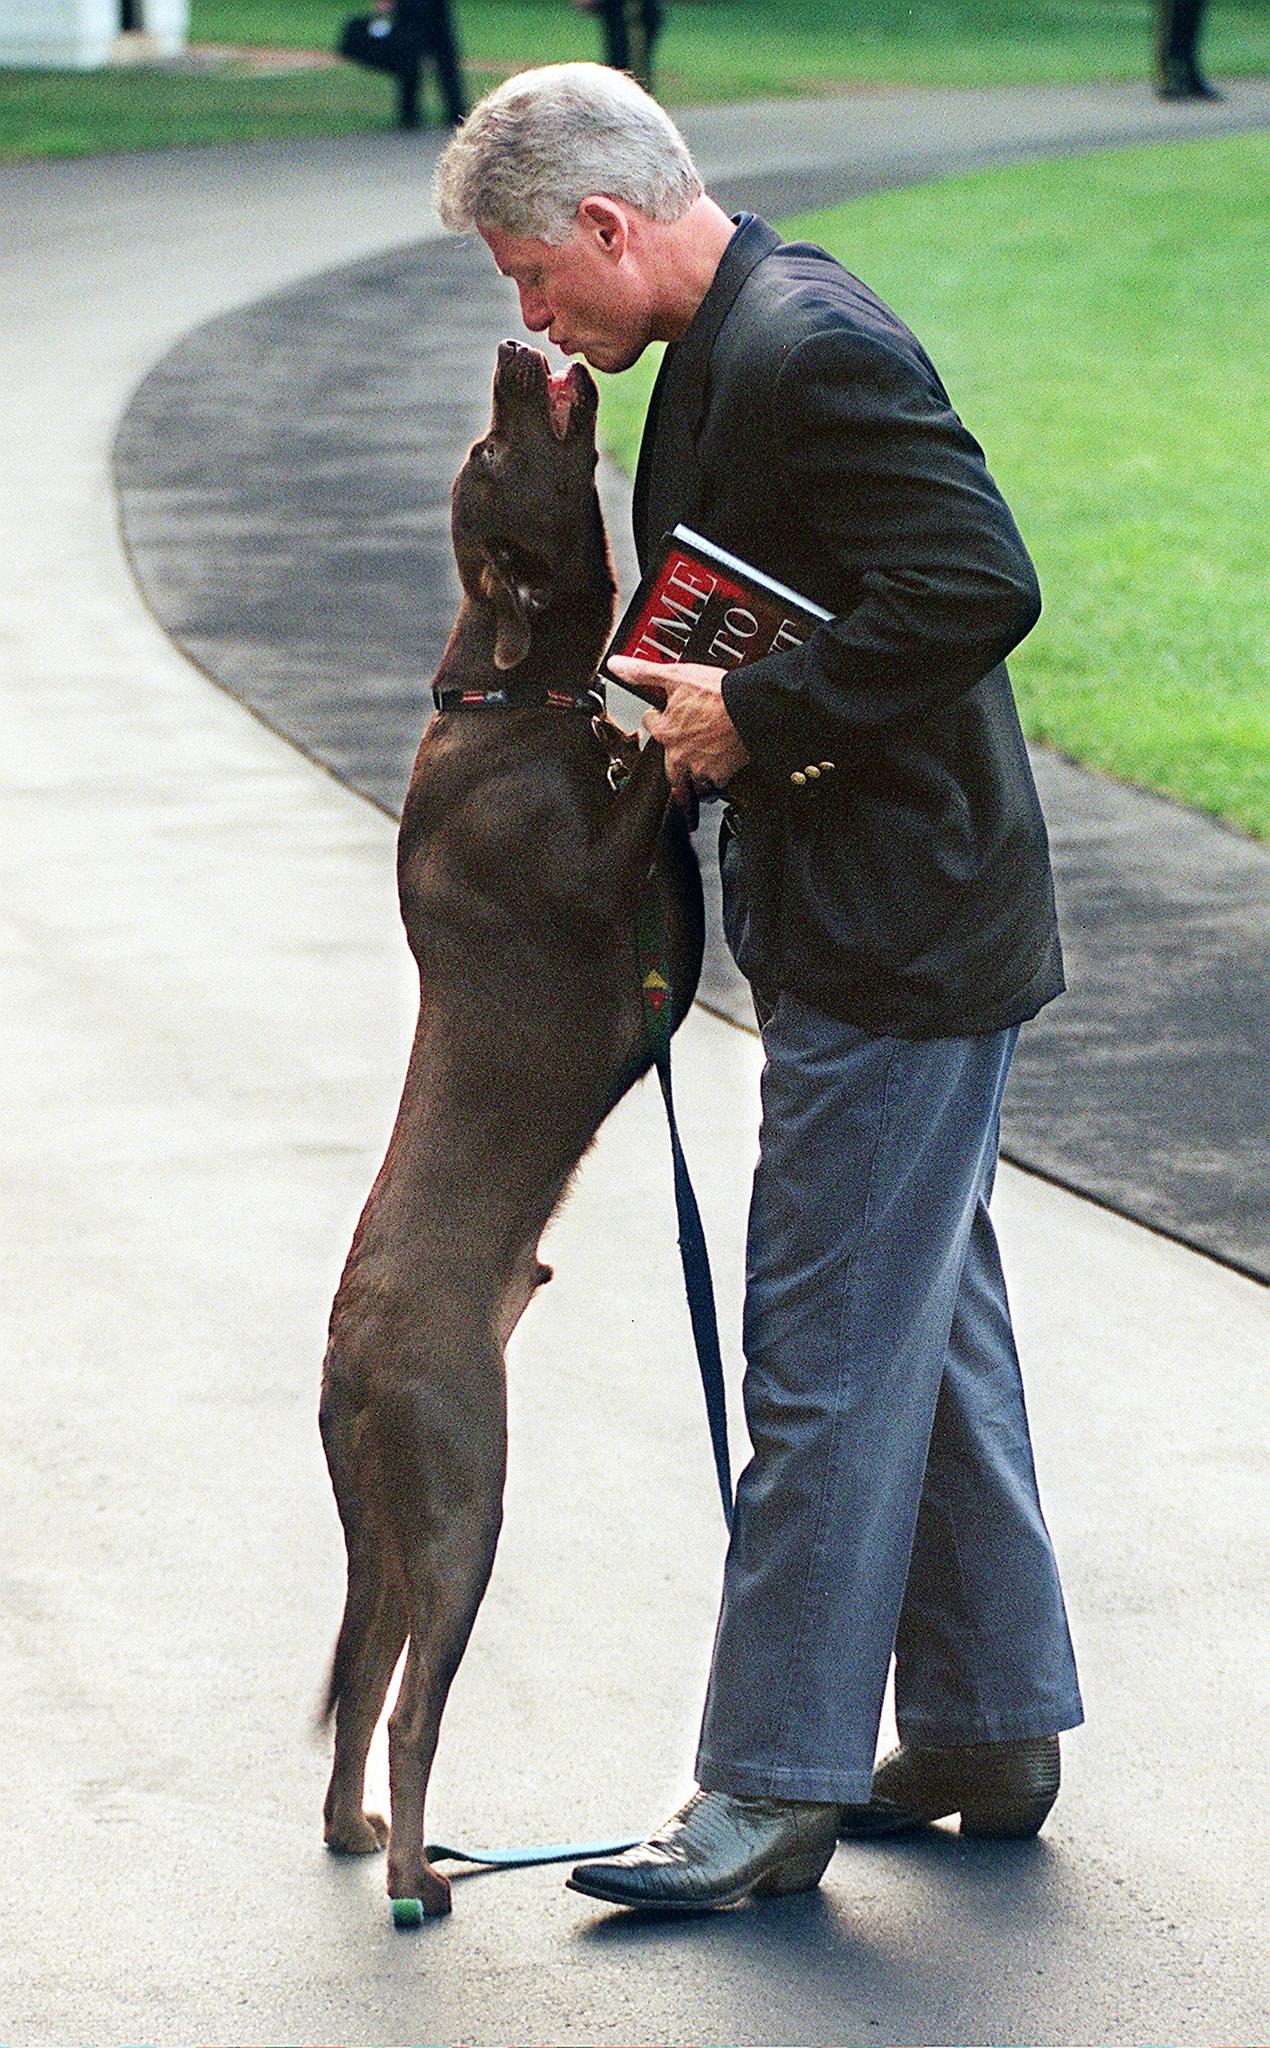 Bill Clinton is greeted by his dog, Buddy, as he arrives at the White House, August 12, 1998.